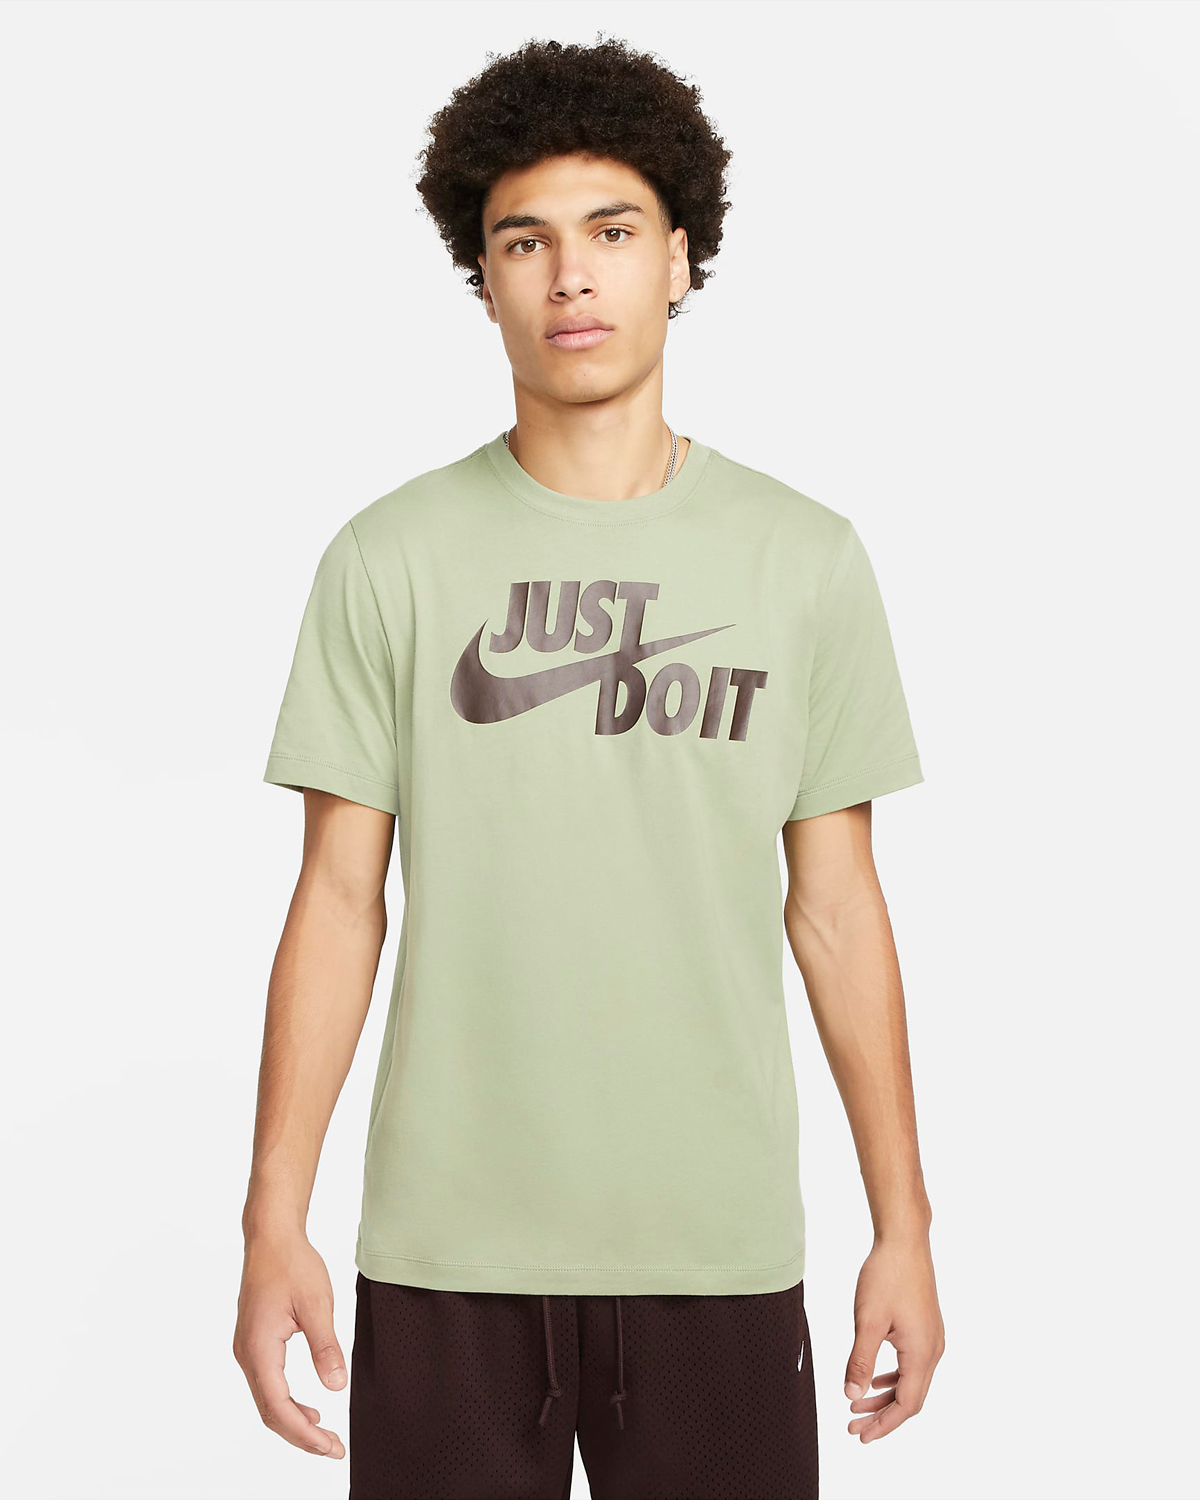 Nike Oil Green Shirts Hats Clothing Sneaker Outfits